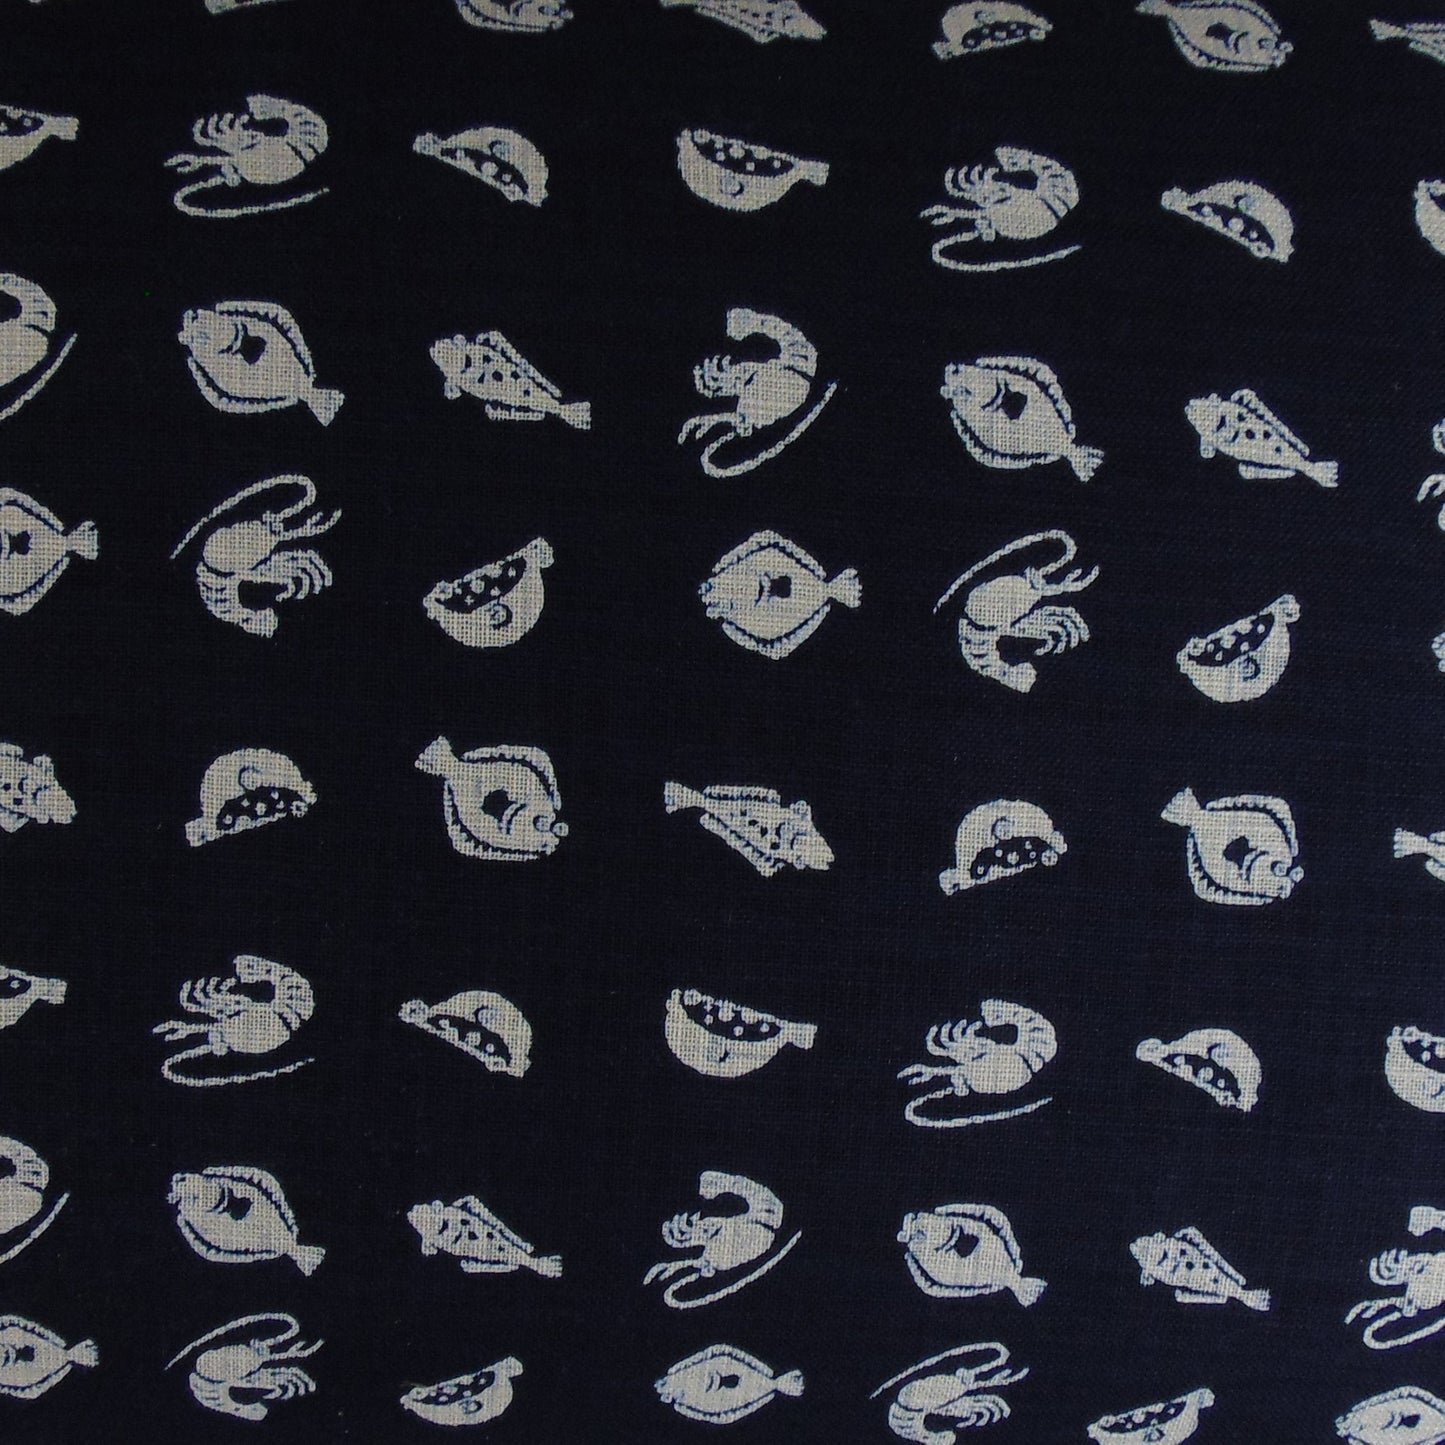 Imported Japanese Fabric - Marin Navy_Fabric_Imported from Japan_100% Cotton_Japanese Sleep System